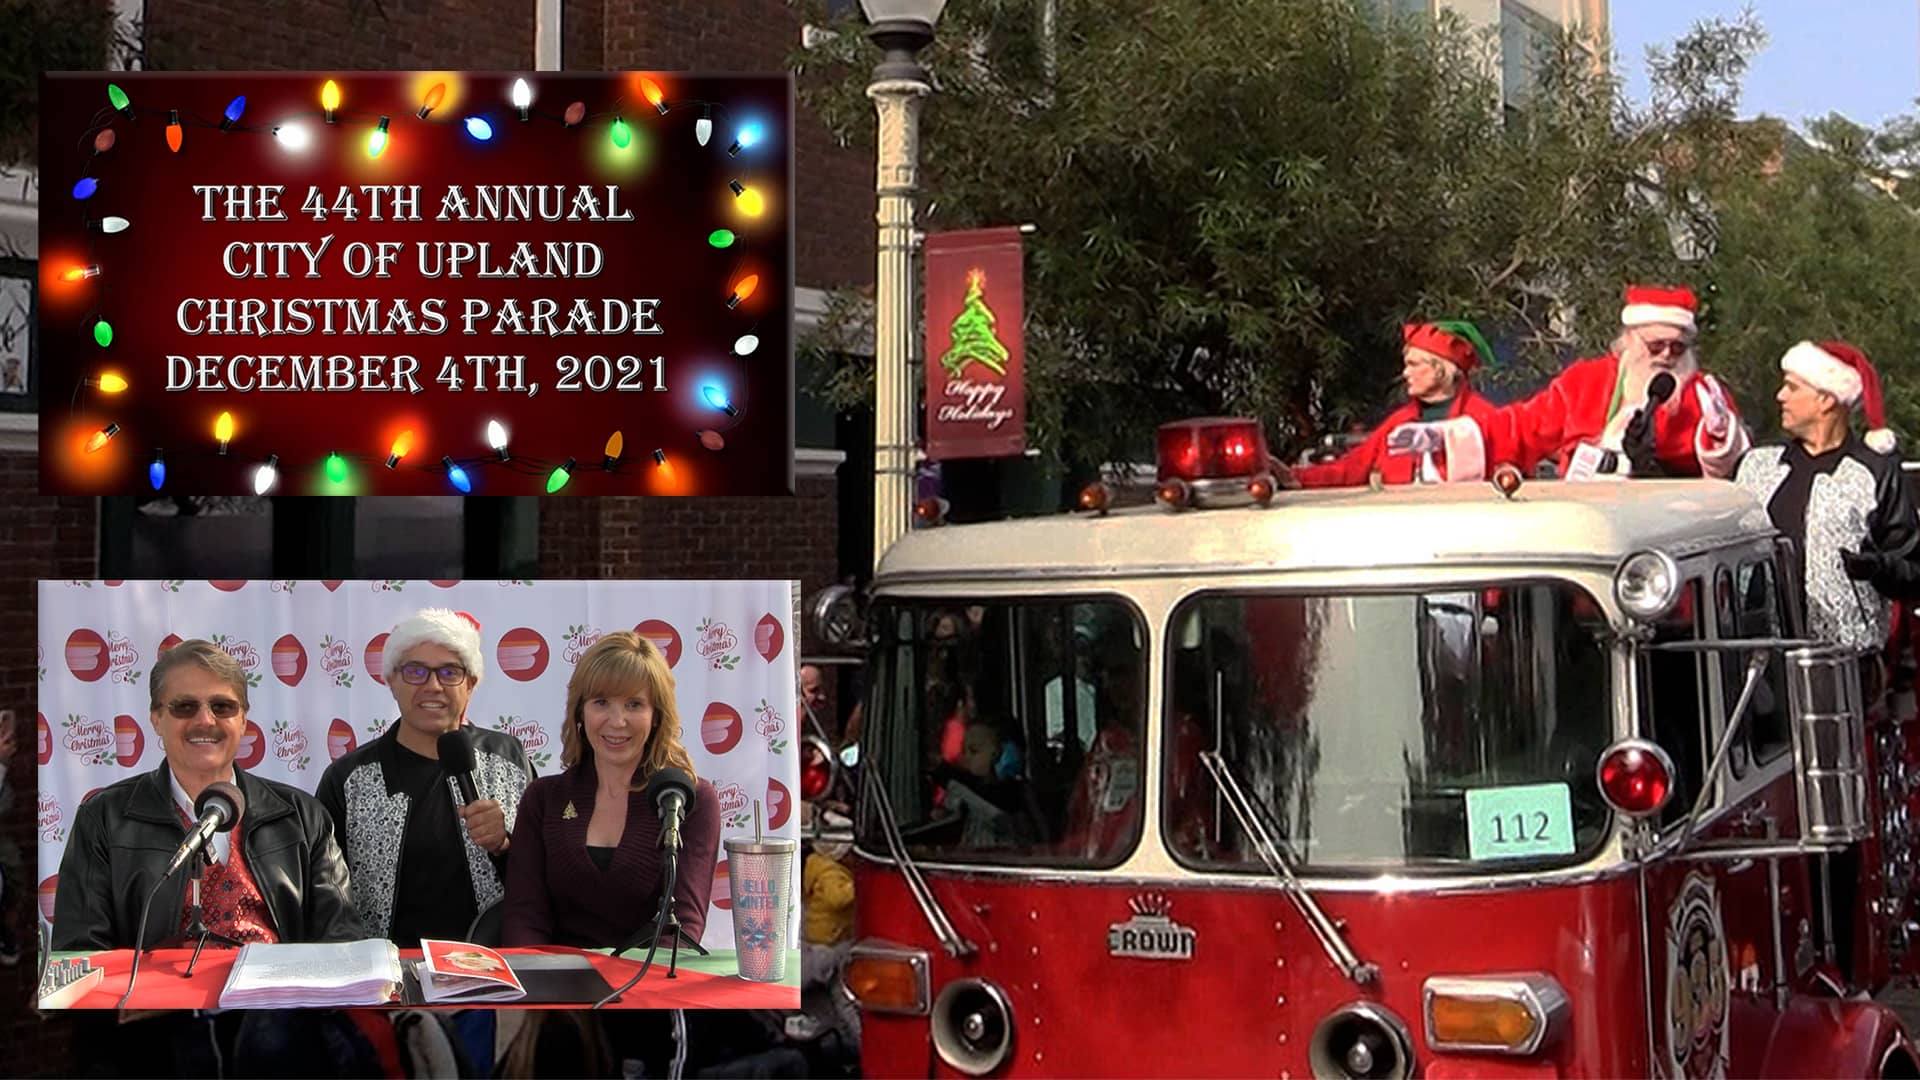 The 44th Annual City of Upland Christmas Parade 12421 on Vimeo